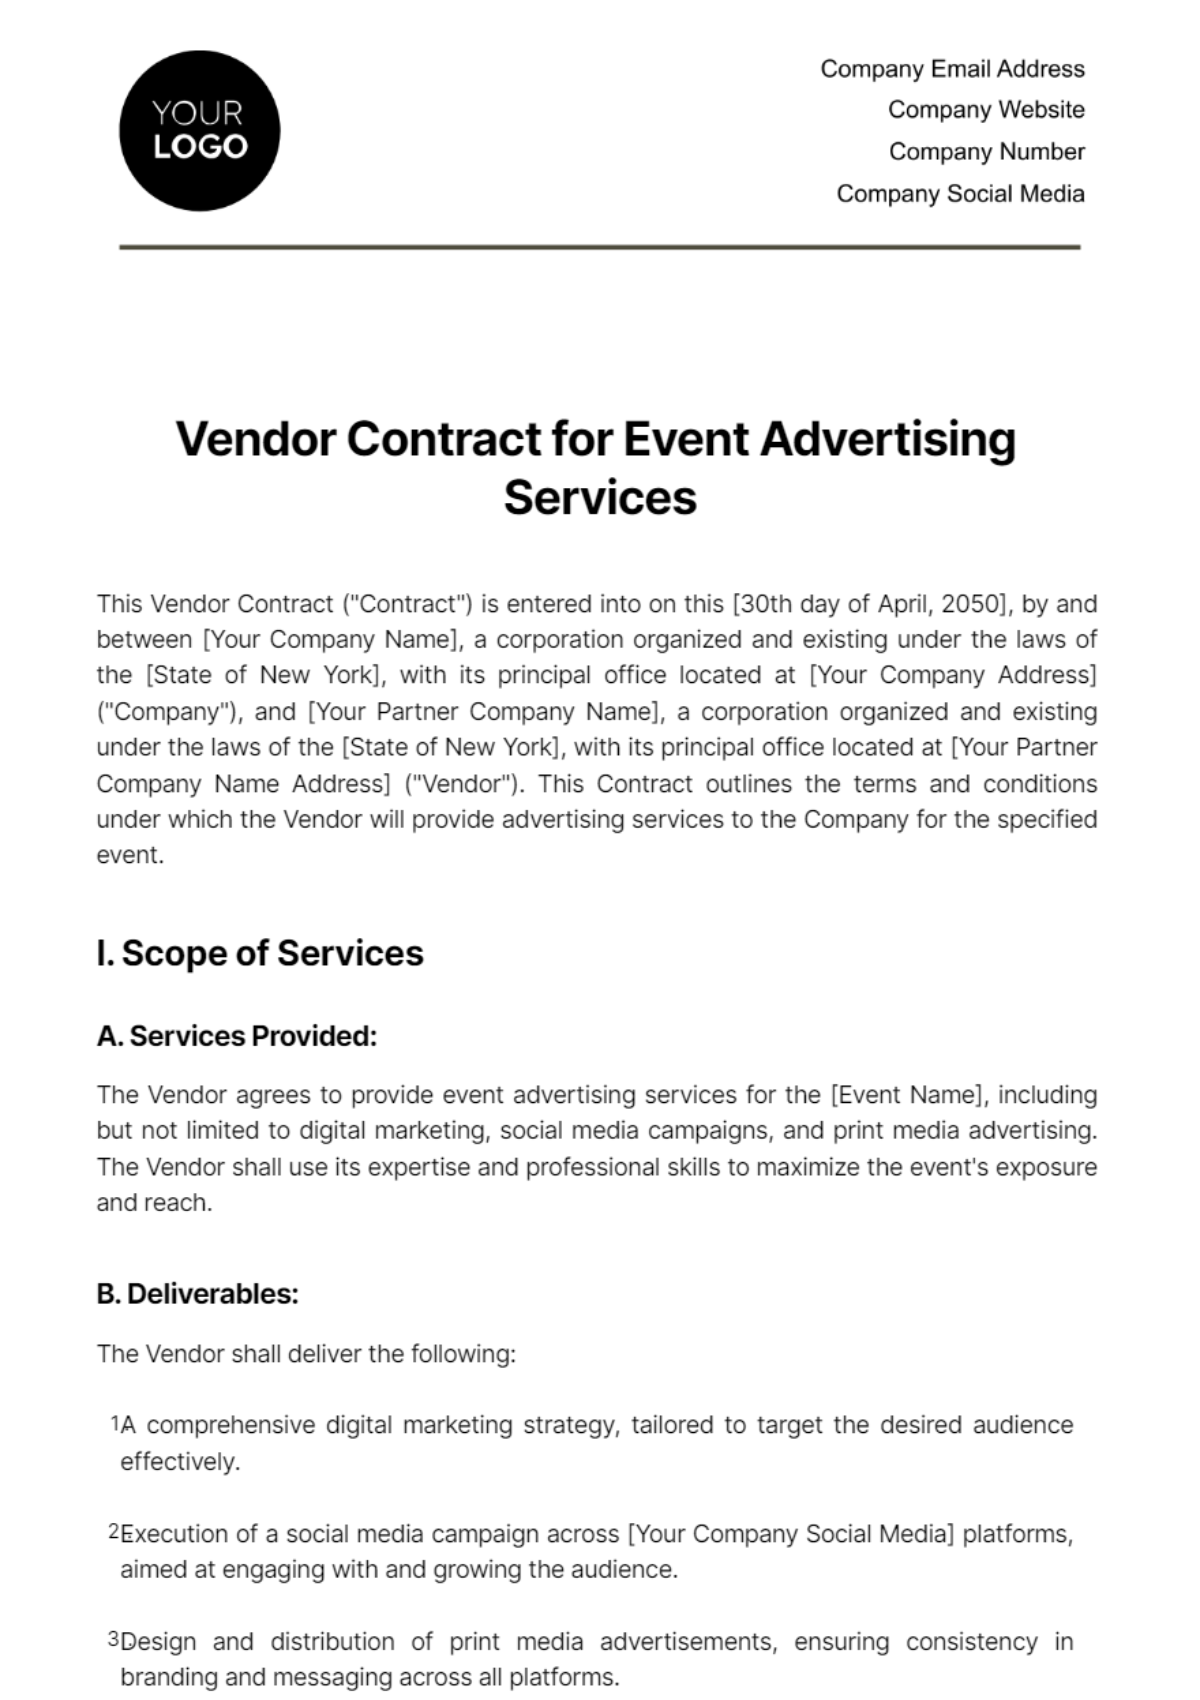 Vendor Contract for Event Advertising Services Template